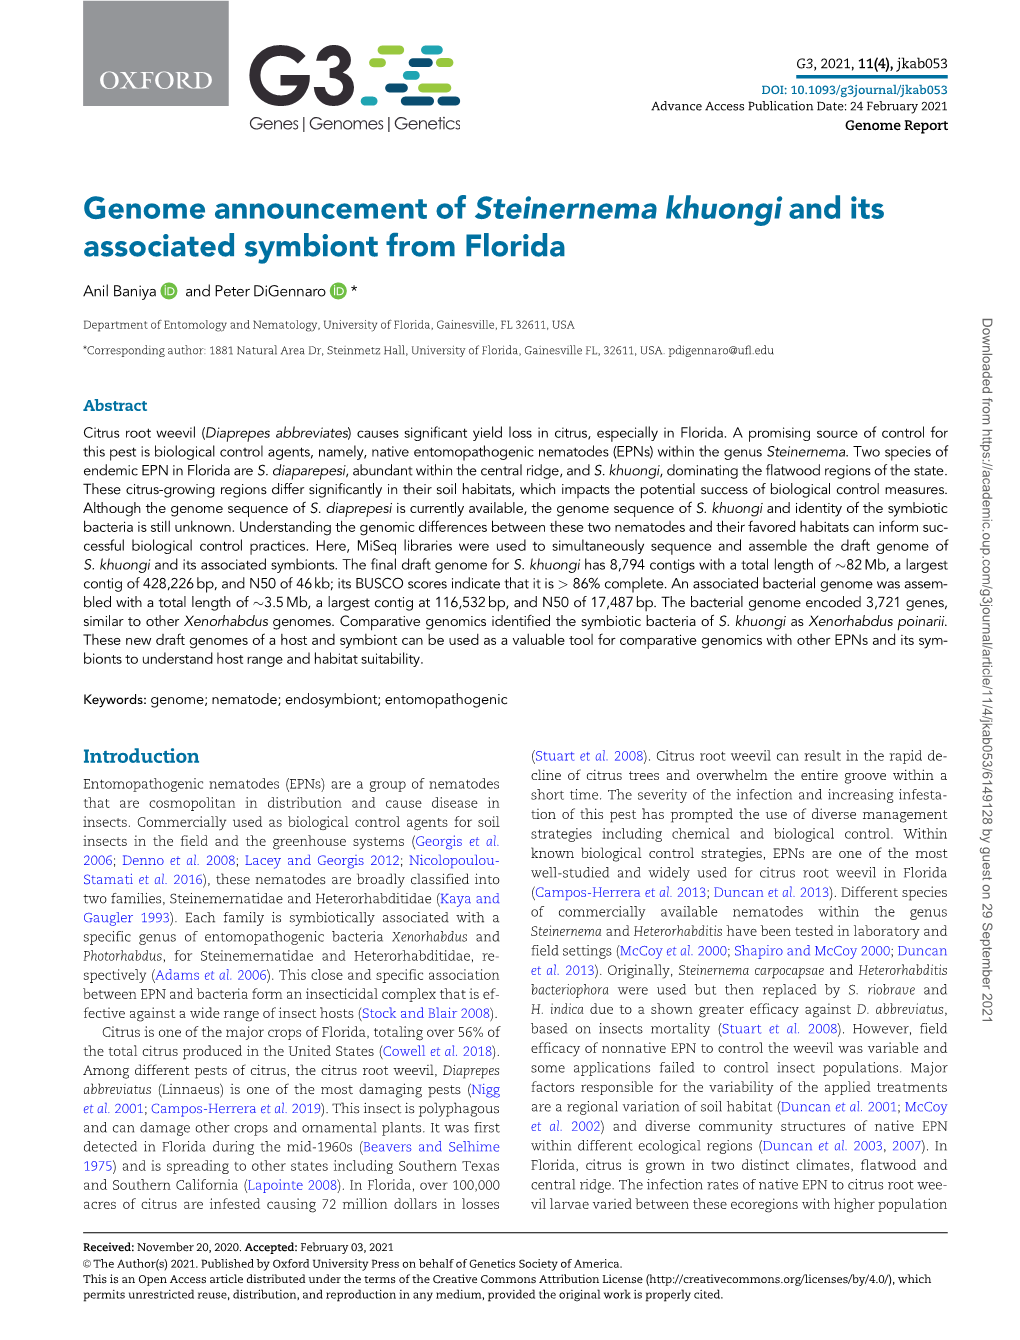 Genome Announcement of Steinernema Khuongi and Its Associated Symbiont from Florida